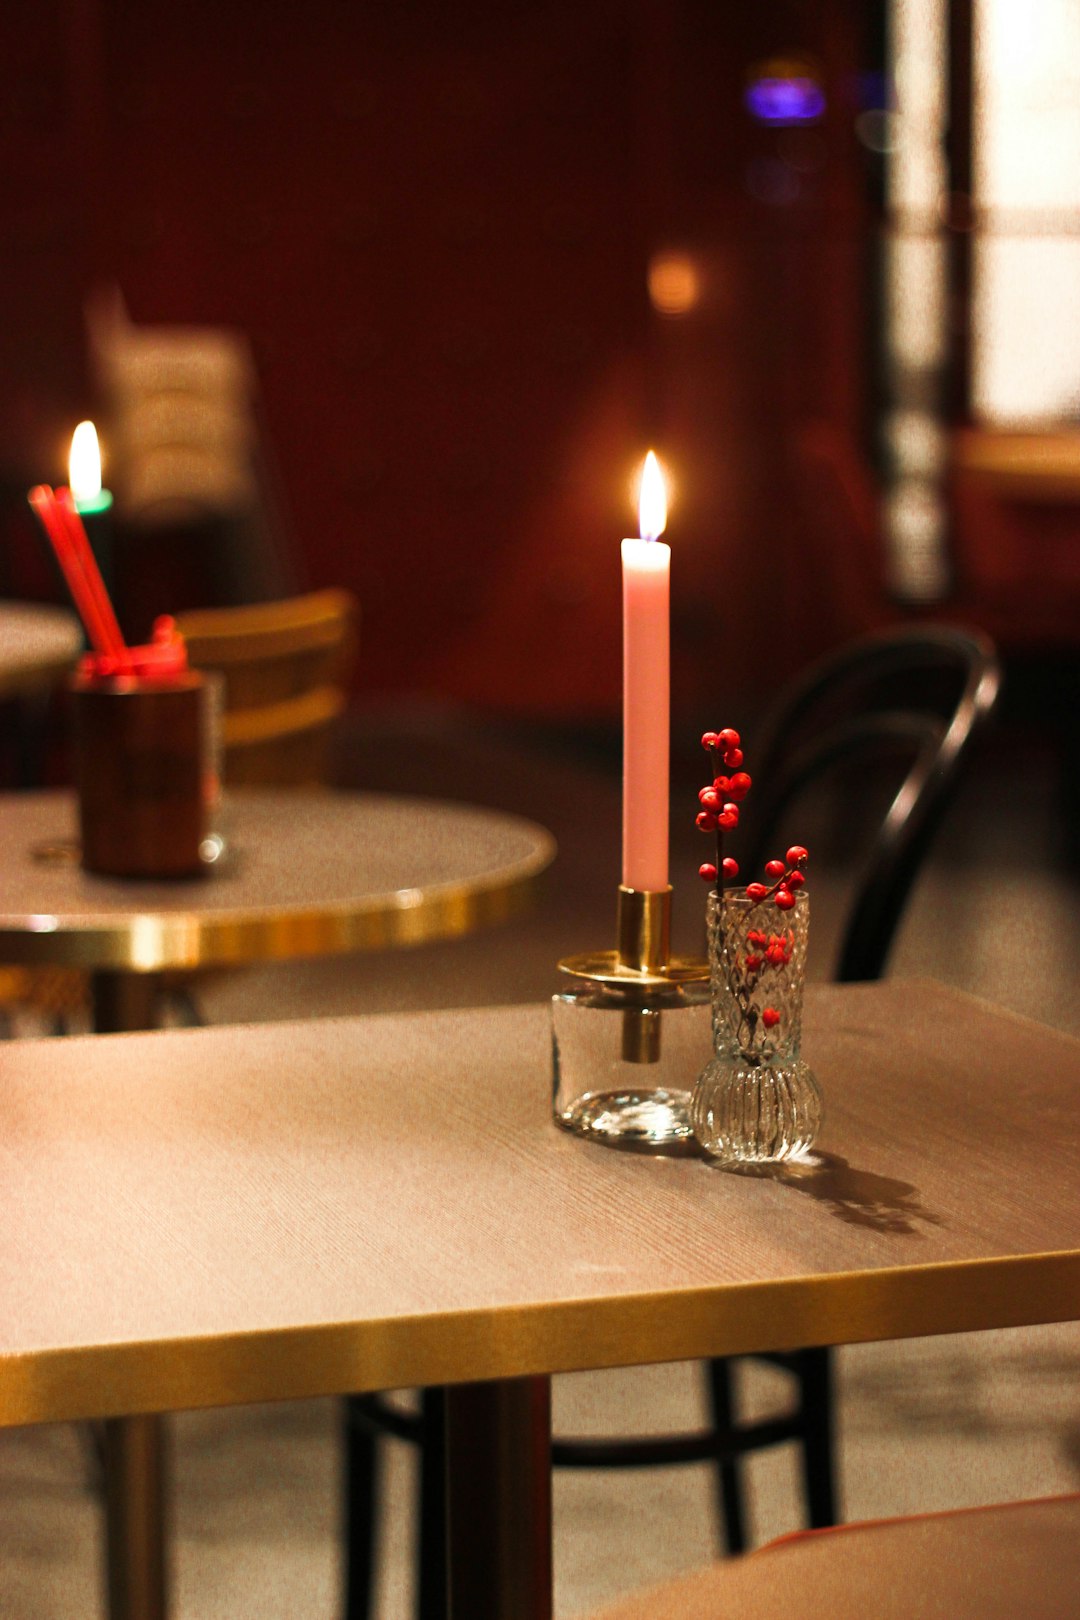 lit candle stick on holder on table